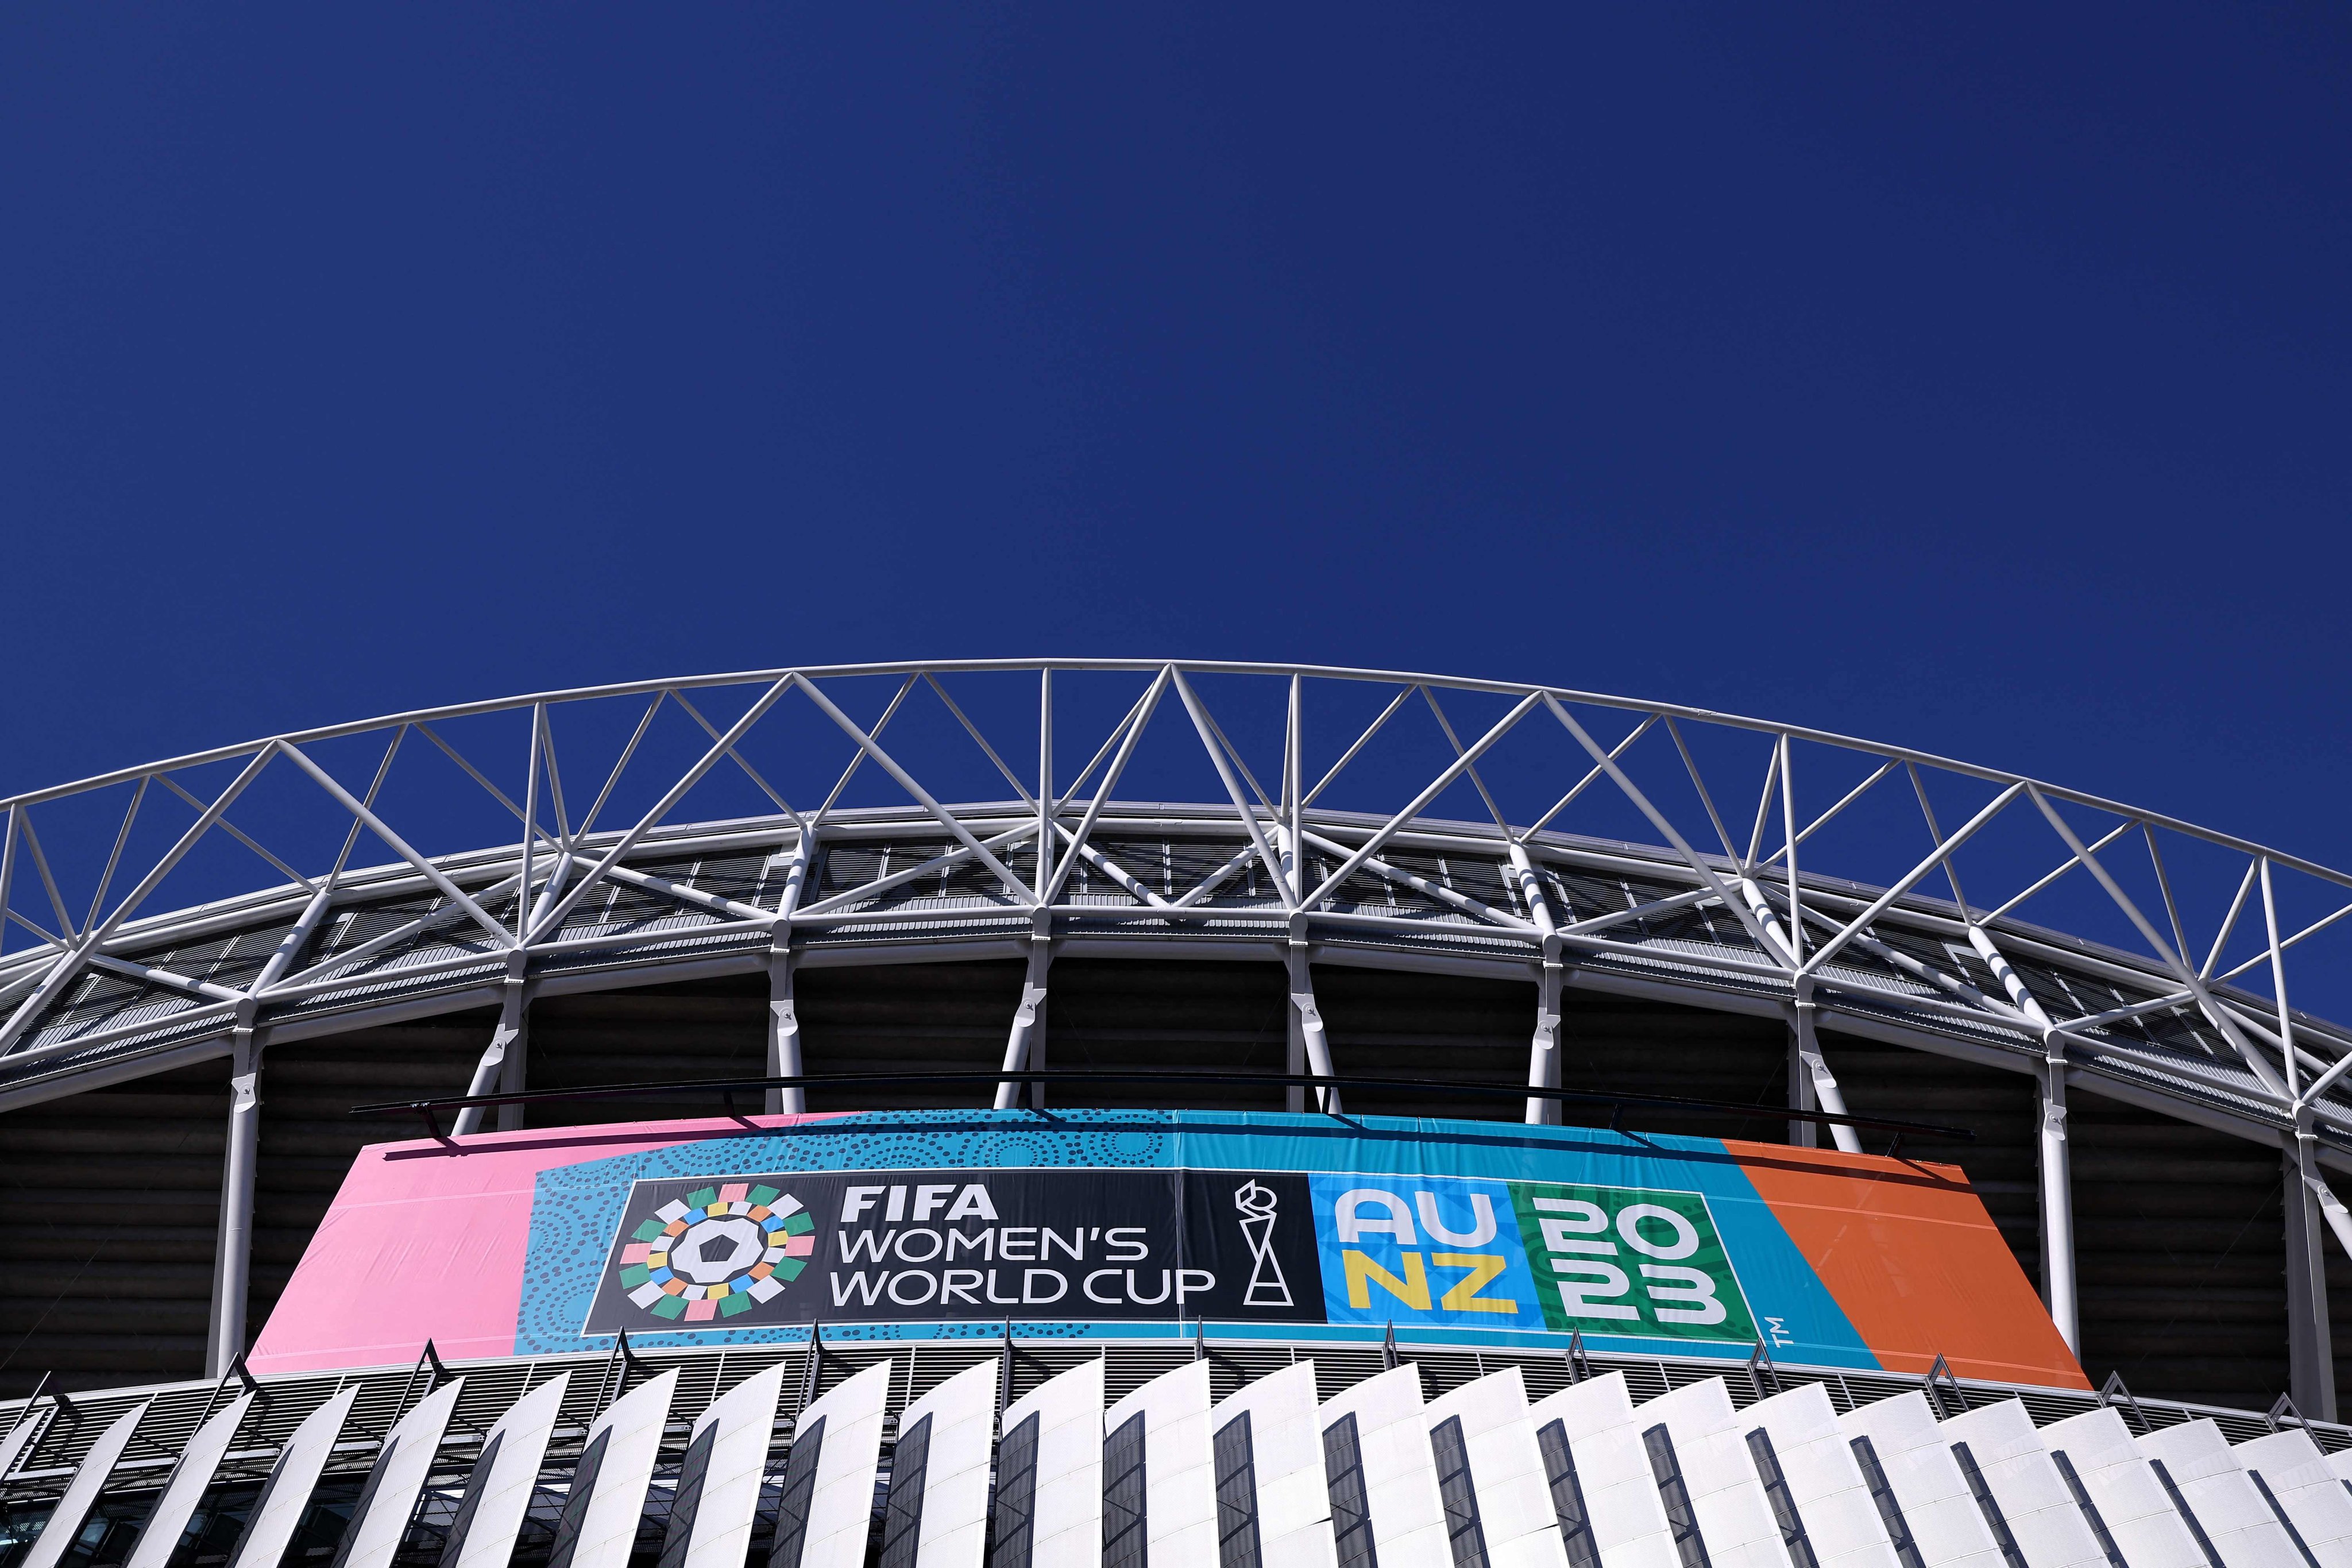 A banner promoting the Fifa Women’s World Cup hangs the Olympic Stadium in Sydney. Photo: AFP